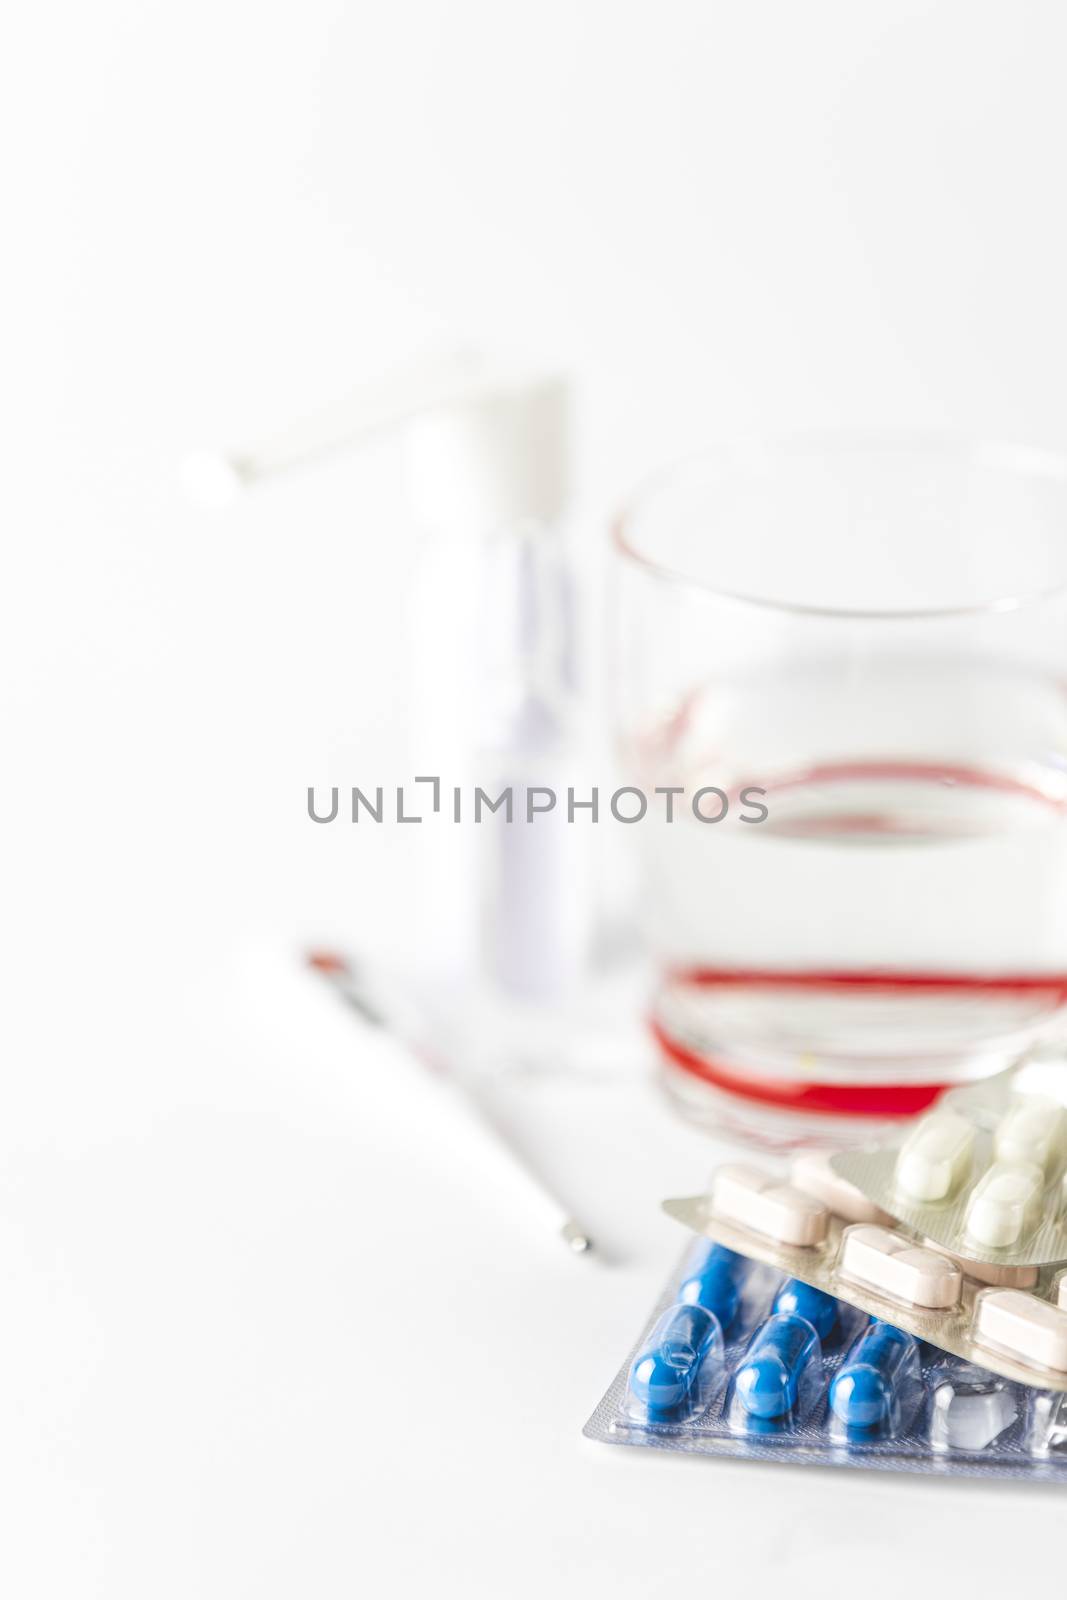 Medicine pills and capsules with glass of water on white background.   2019 nCoV Coronavirus originating in Wuhan, China. Medical health concept.